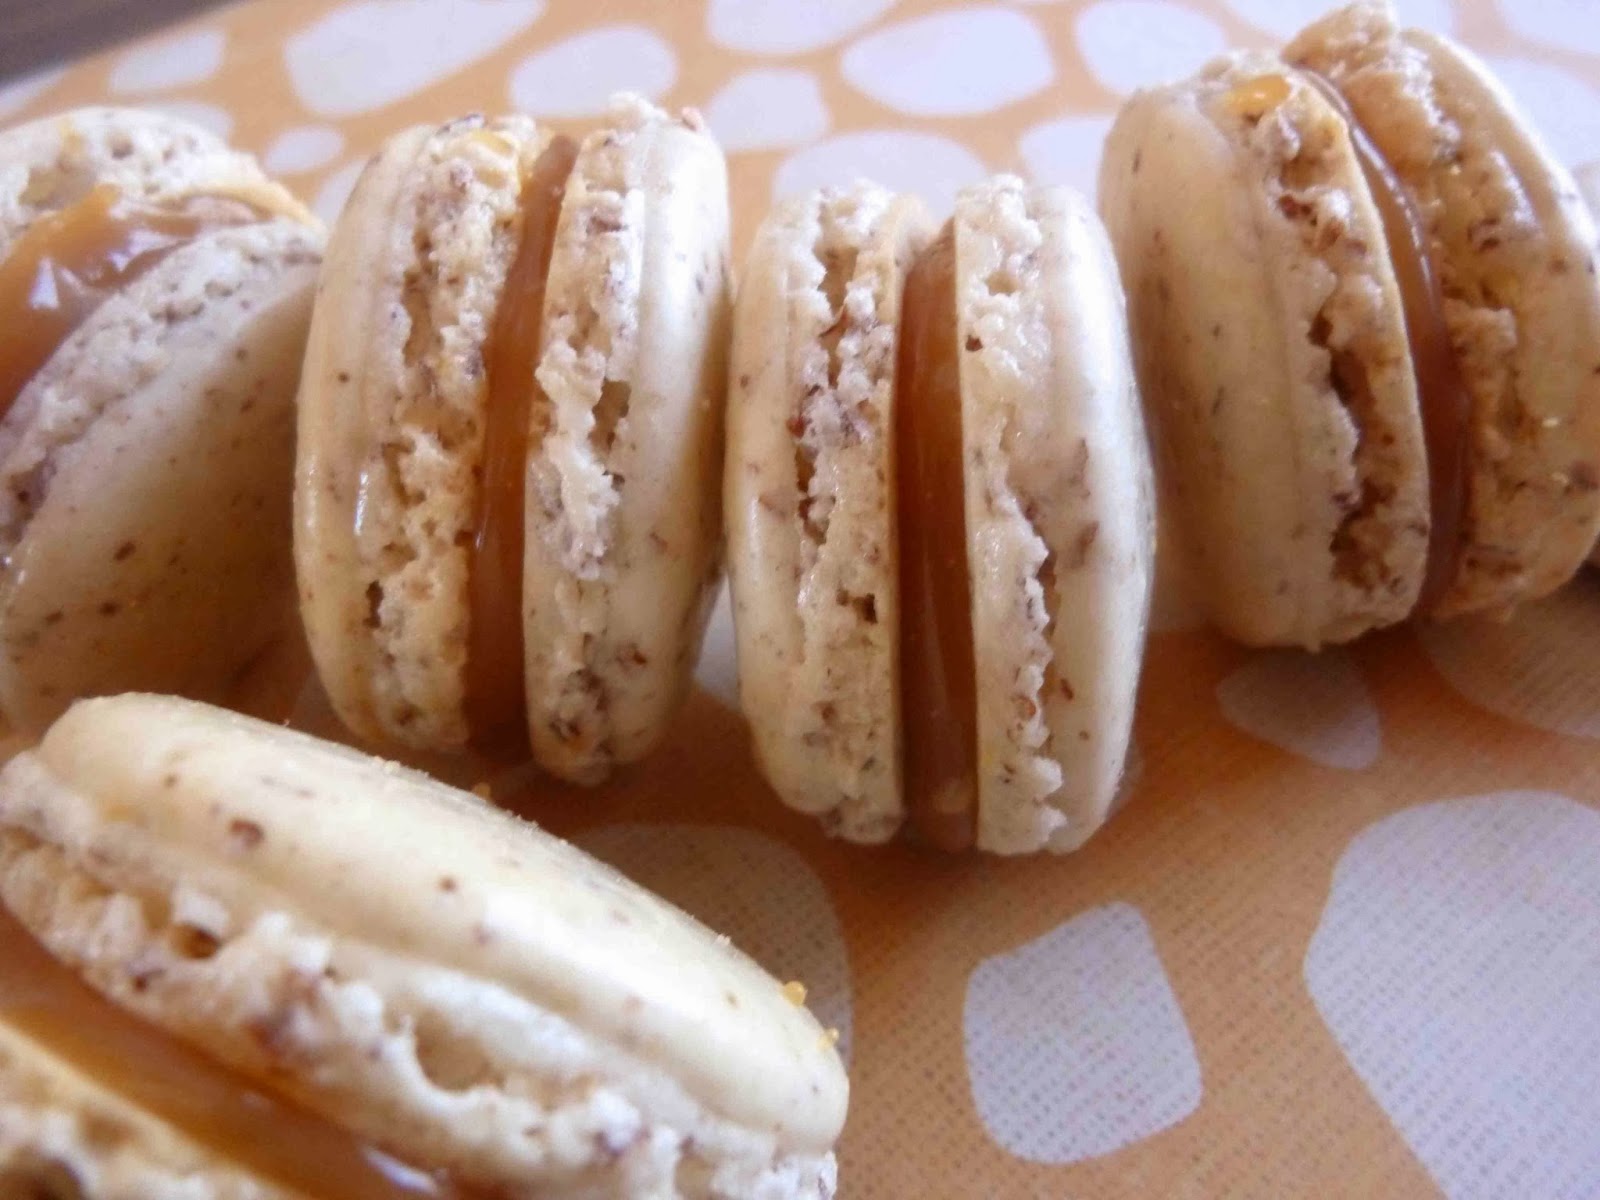 Macaron Monday: Caramel Macchiato French Macarons with Salted Caramel Filling – Diary of a Mad Hausfrau